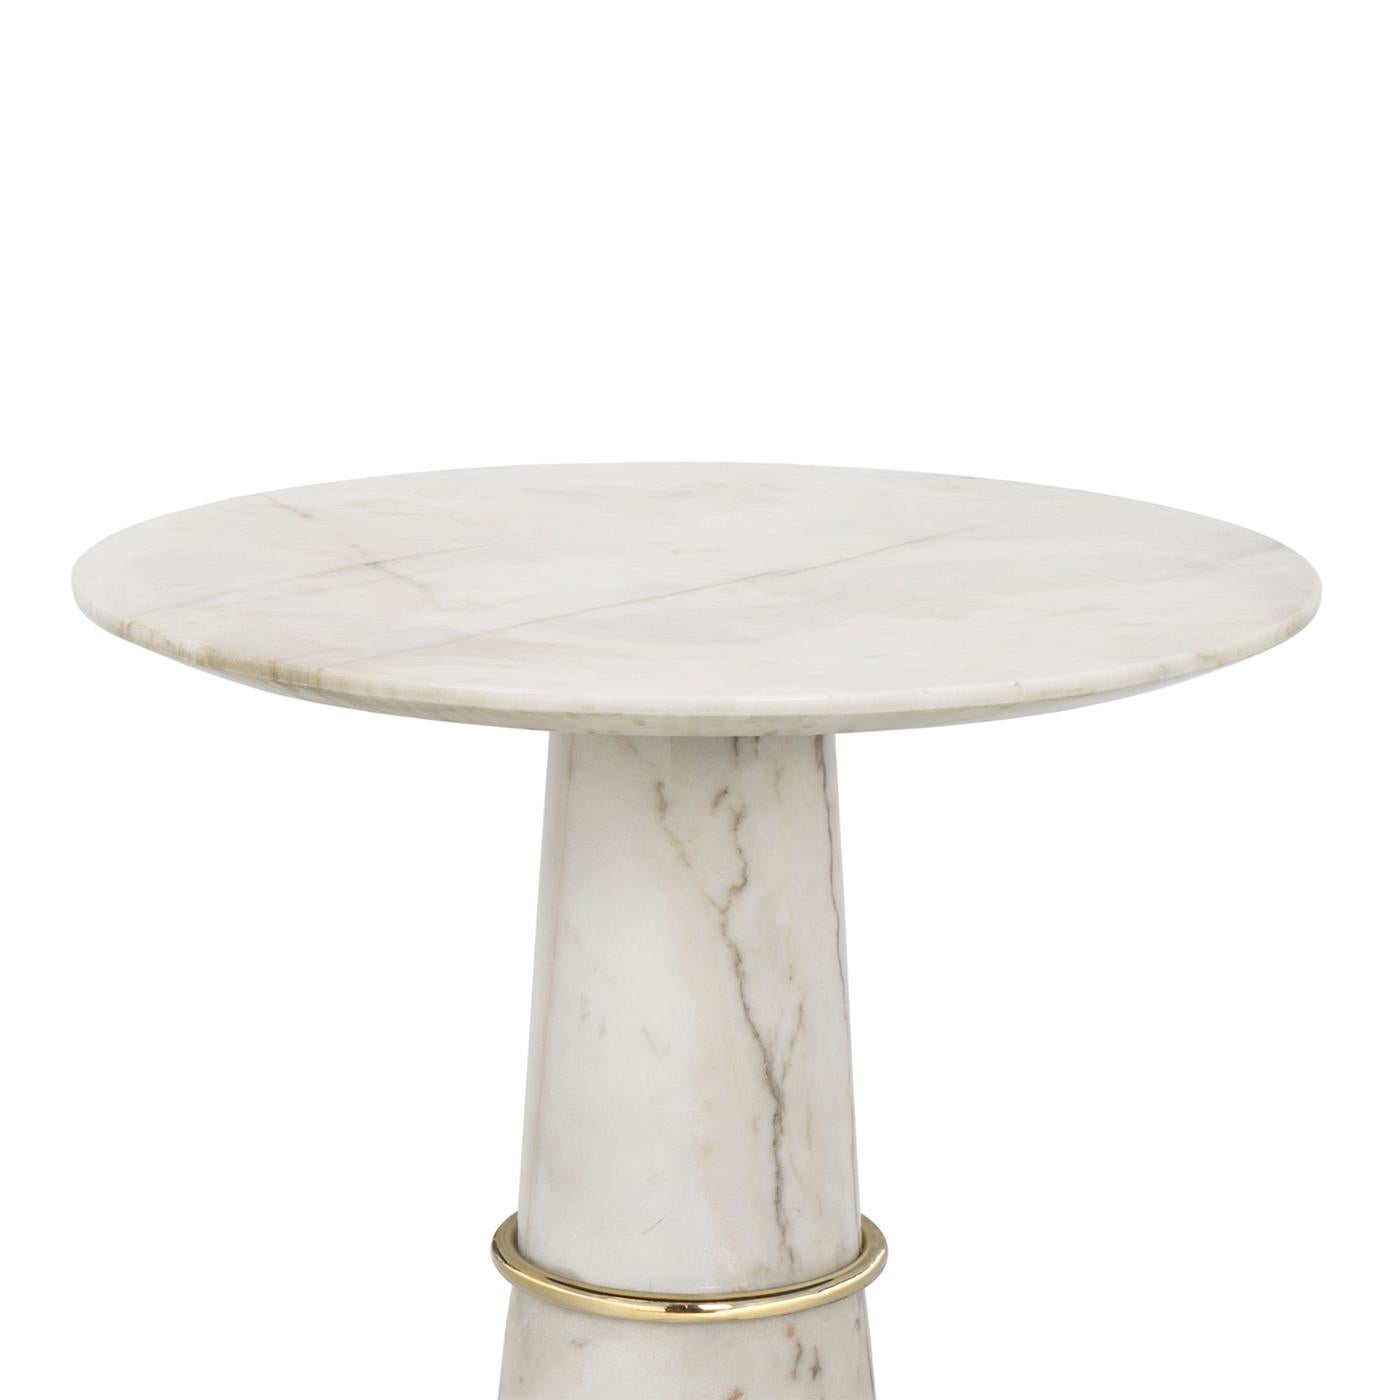 Coffee table Tama high all in solid white marble,
with polished brass finishes.